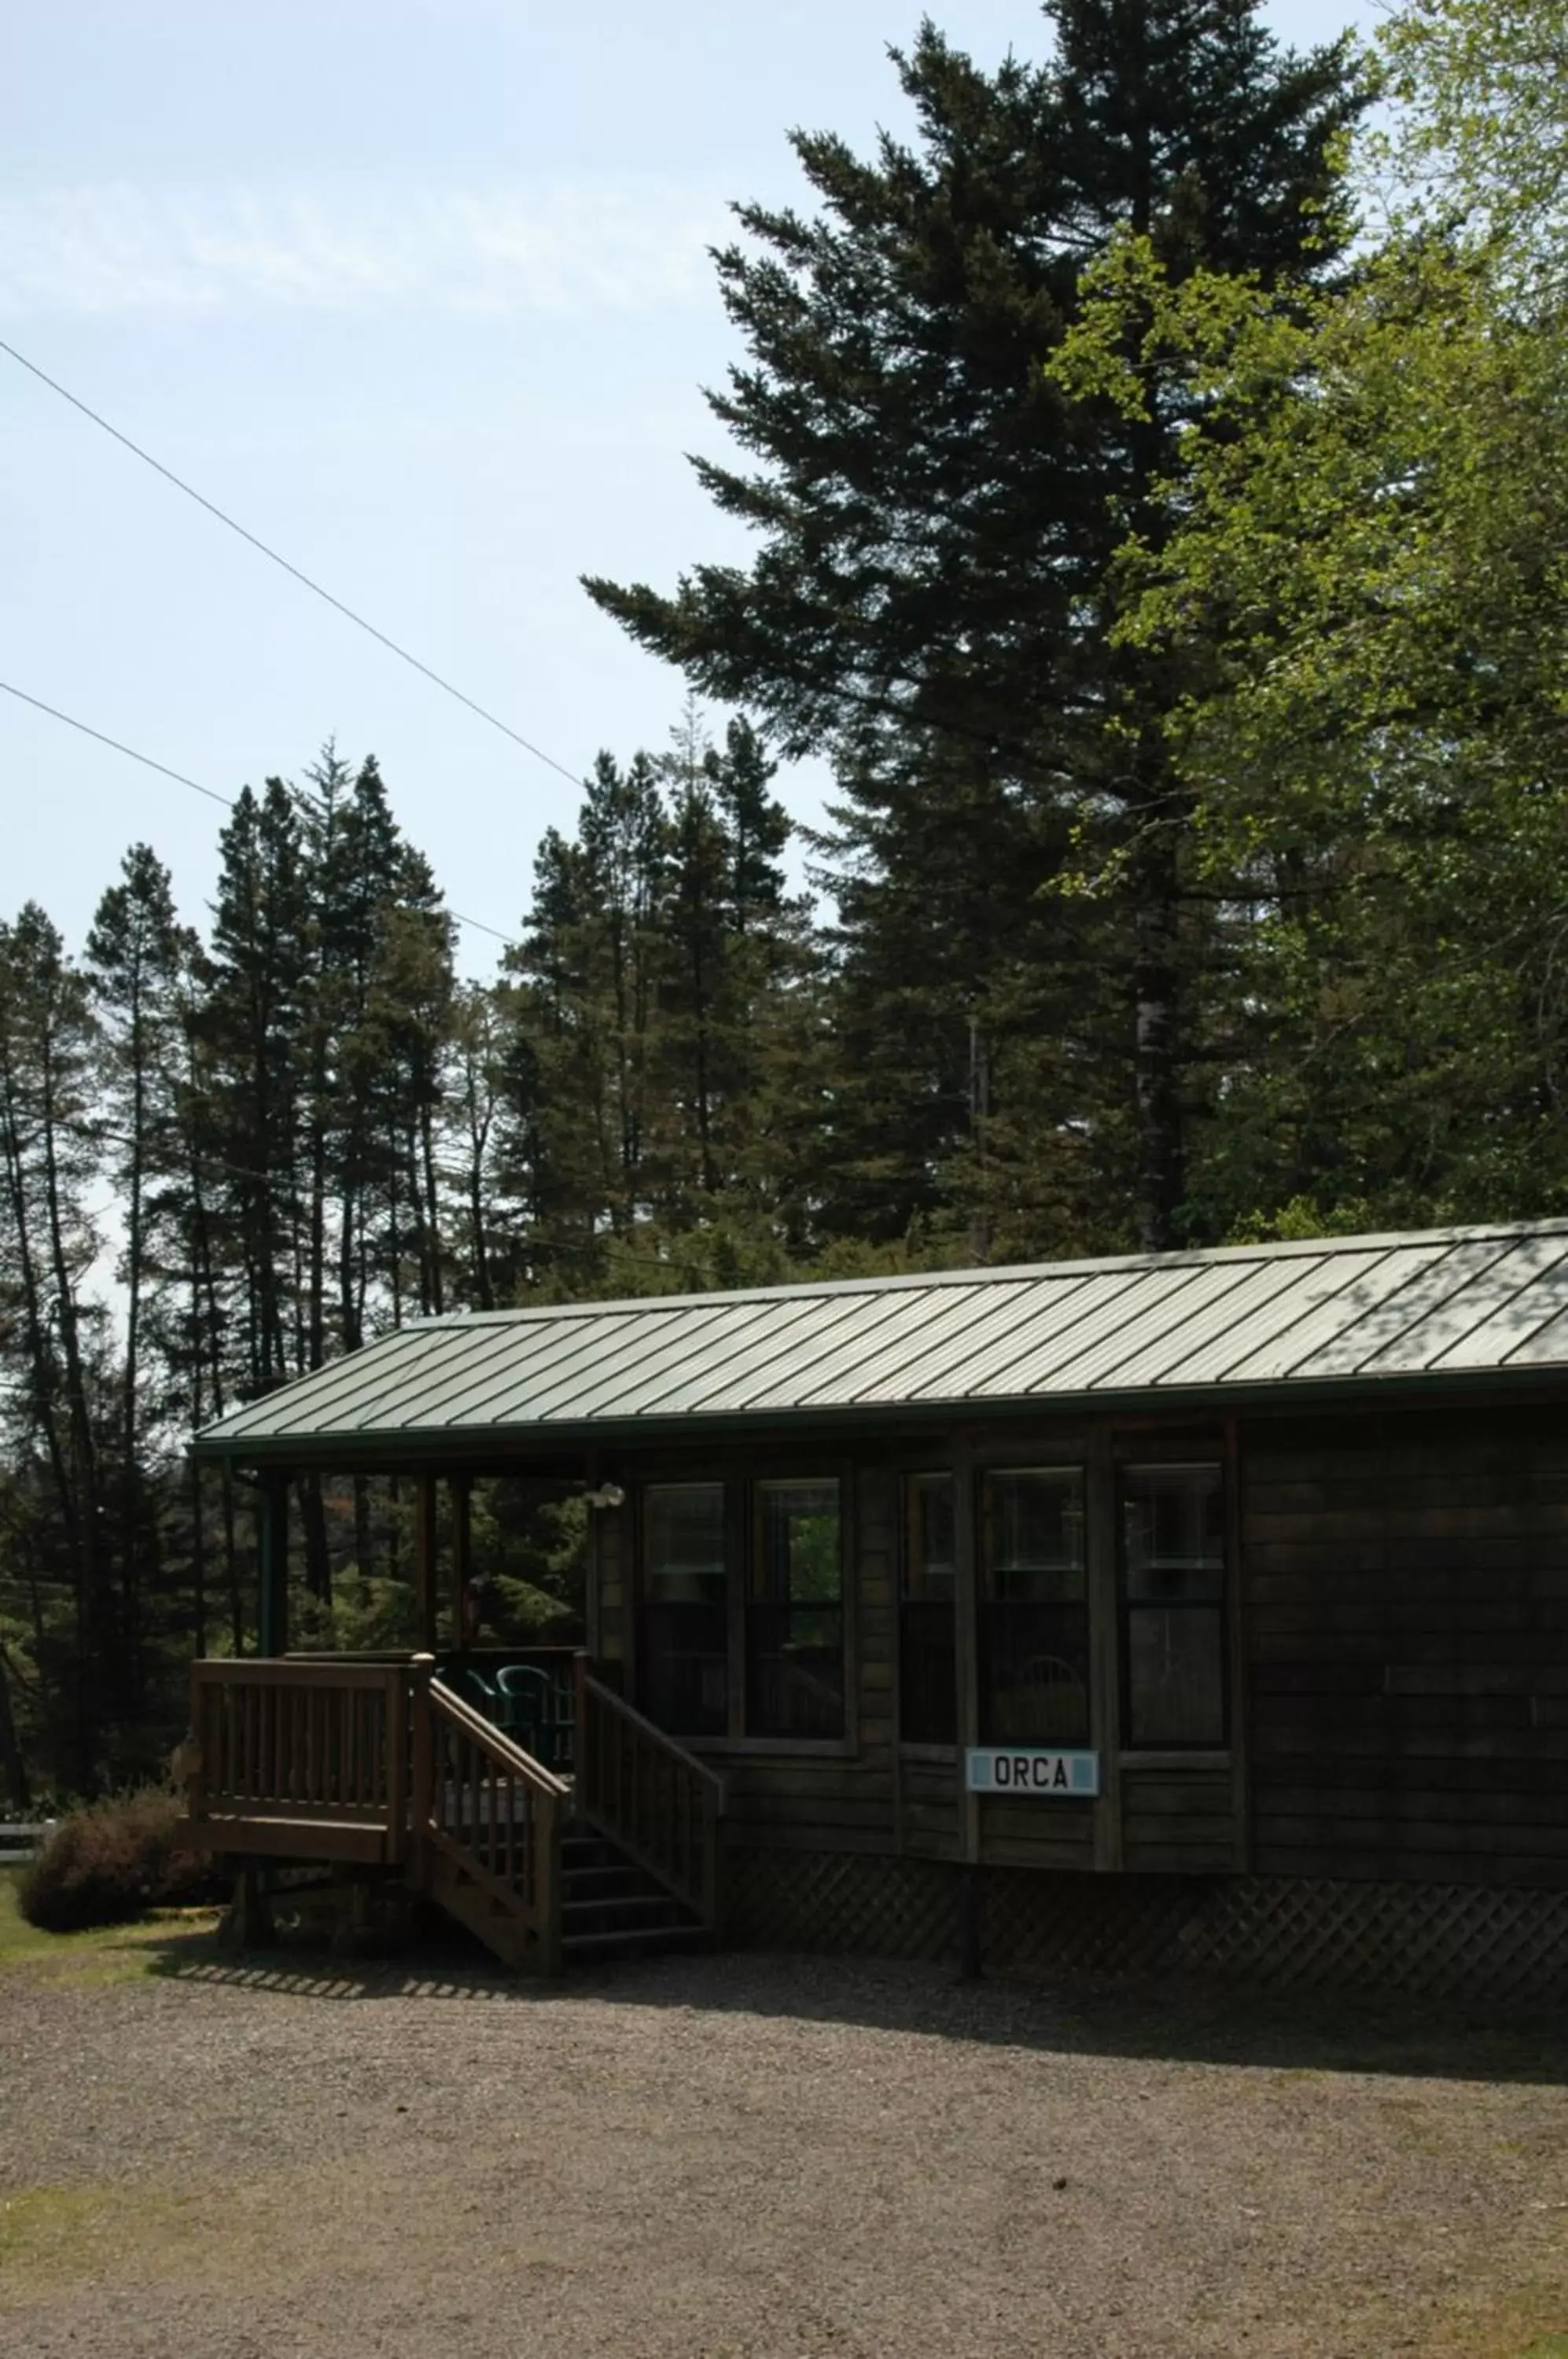 Property Building in Park Motel and Cabins